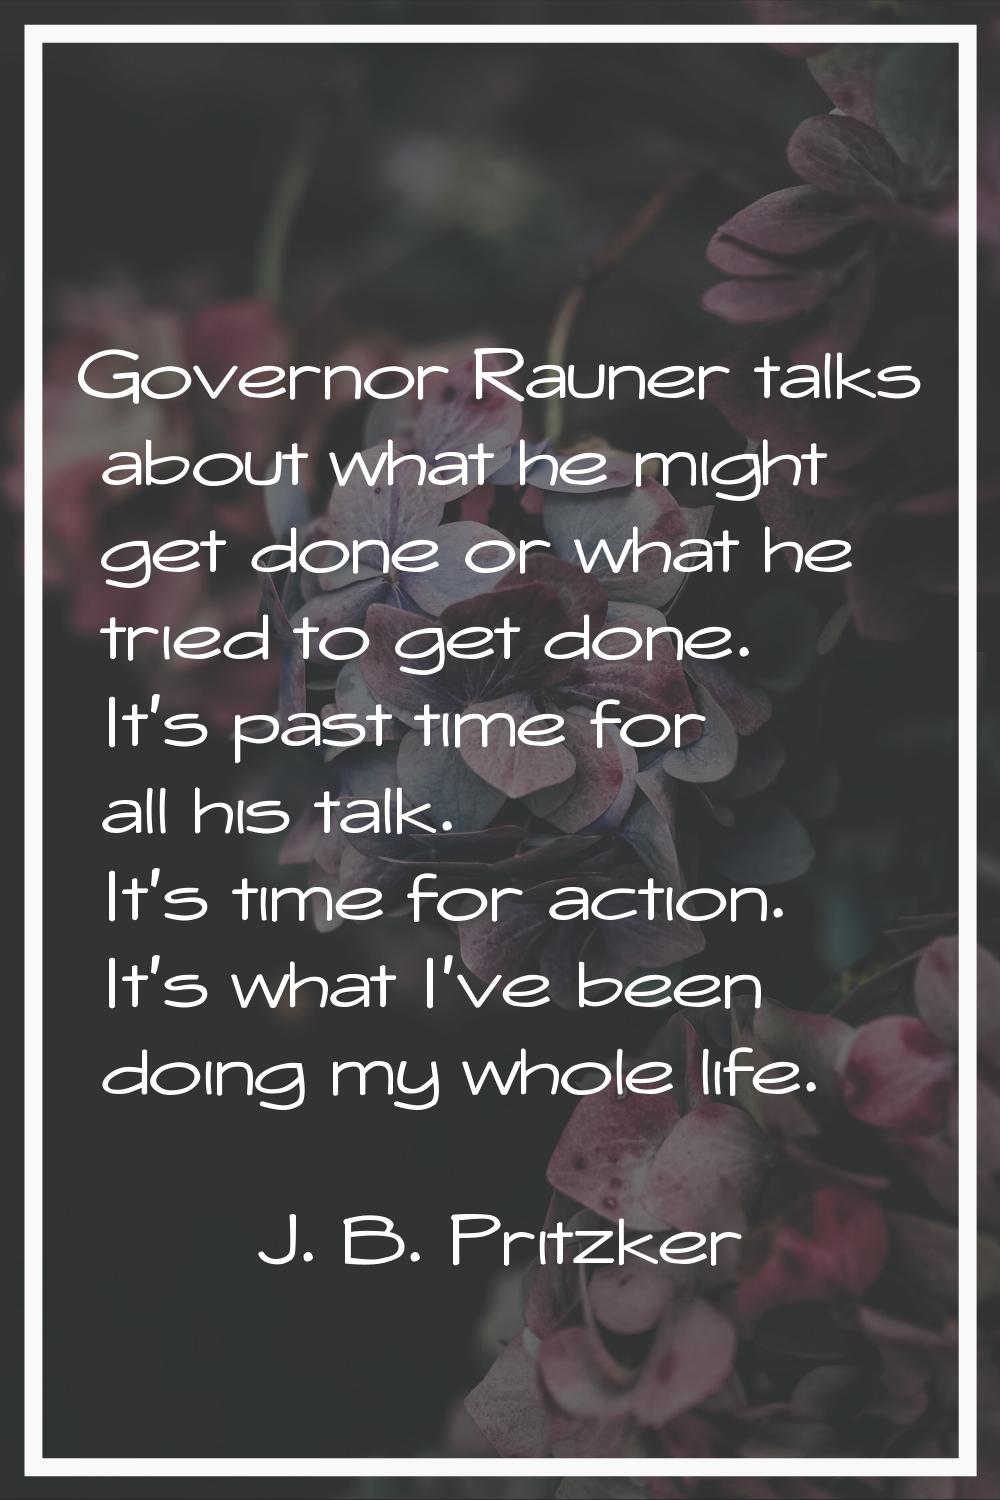 Governor Rauner talks about what he might get done or what he tried to get done. It's past time for